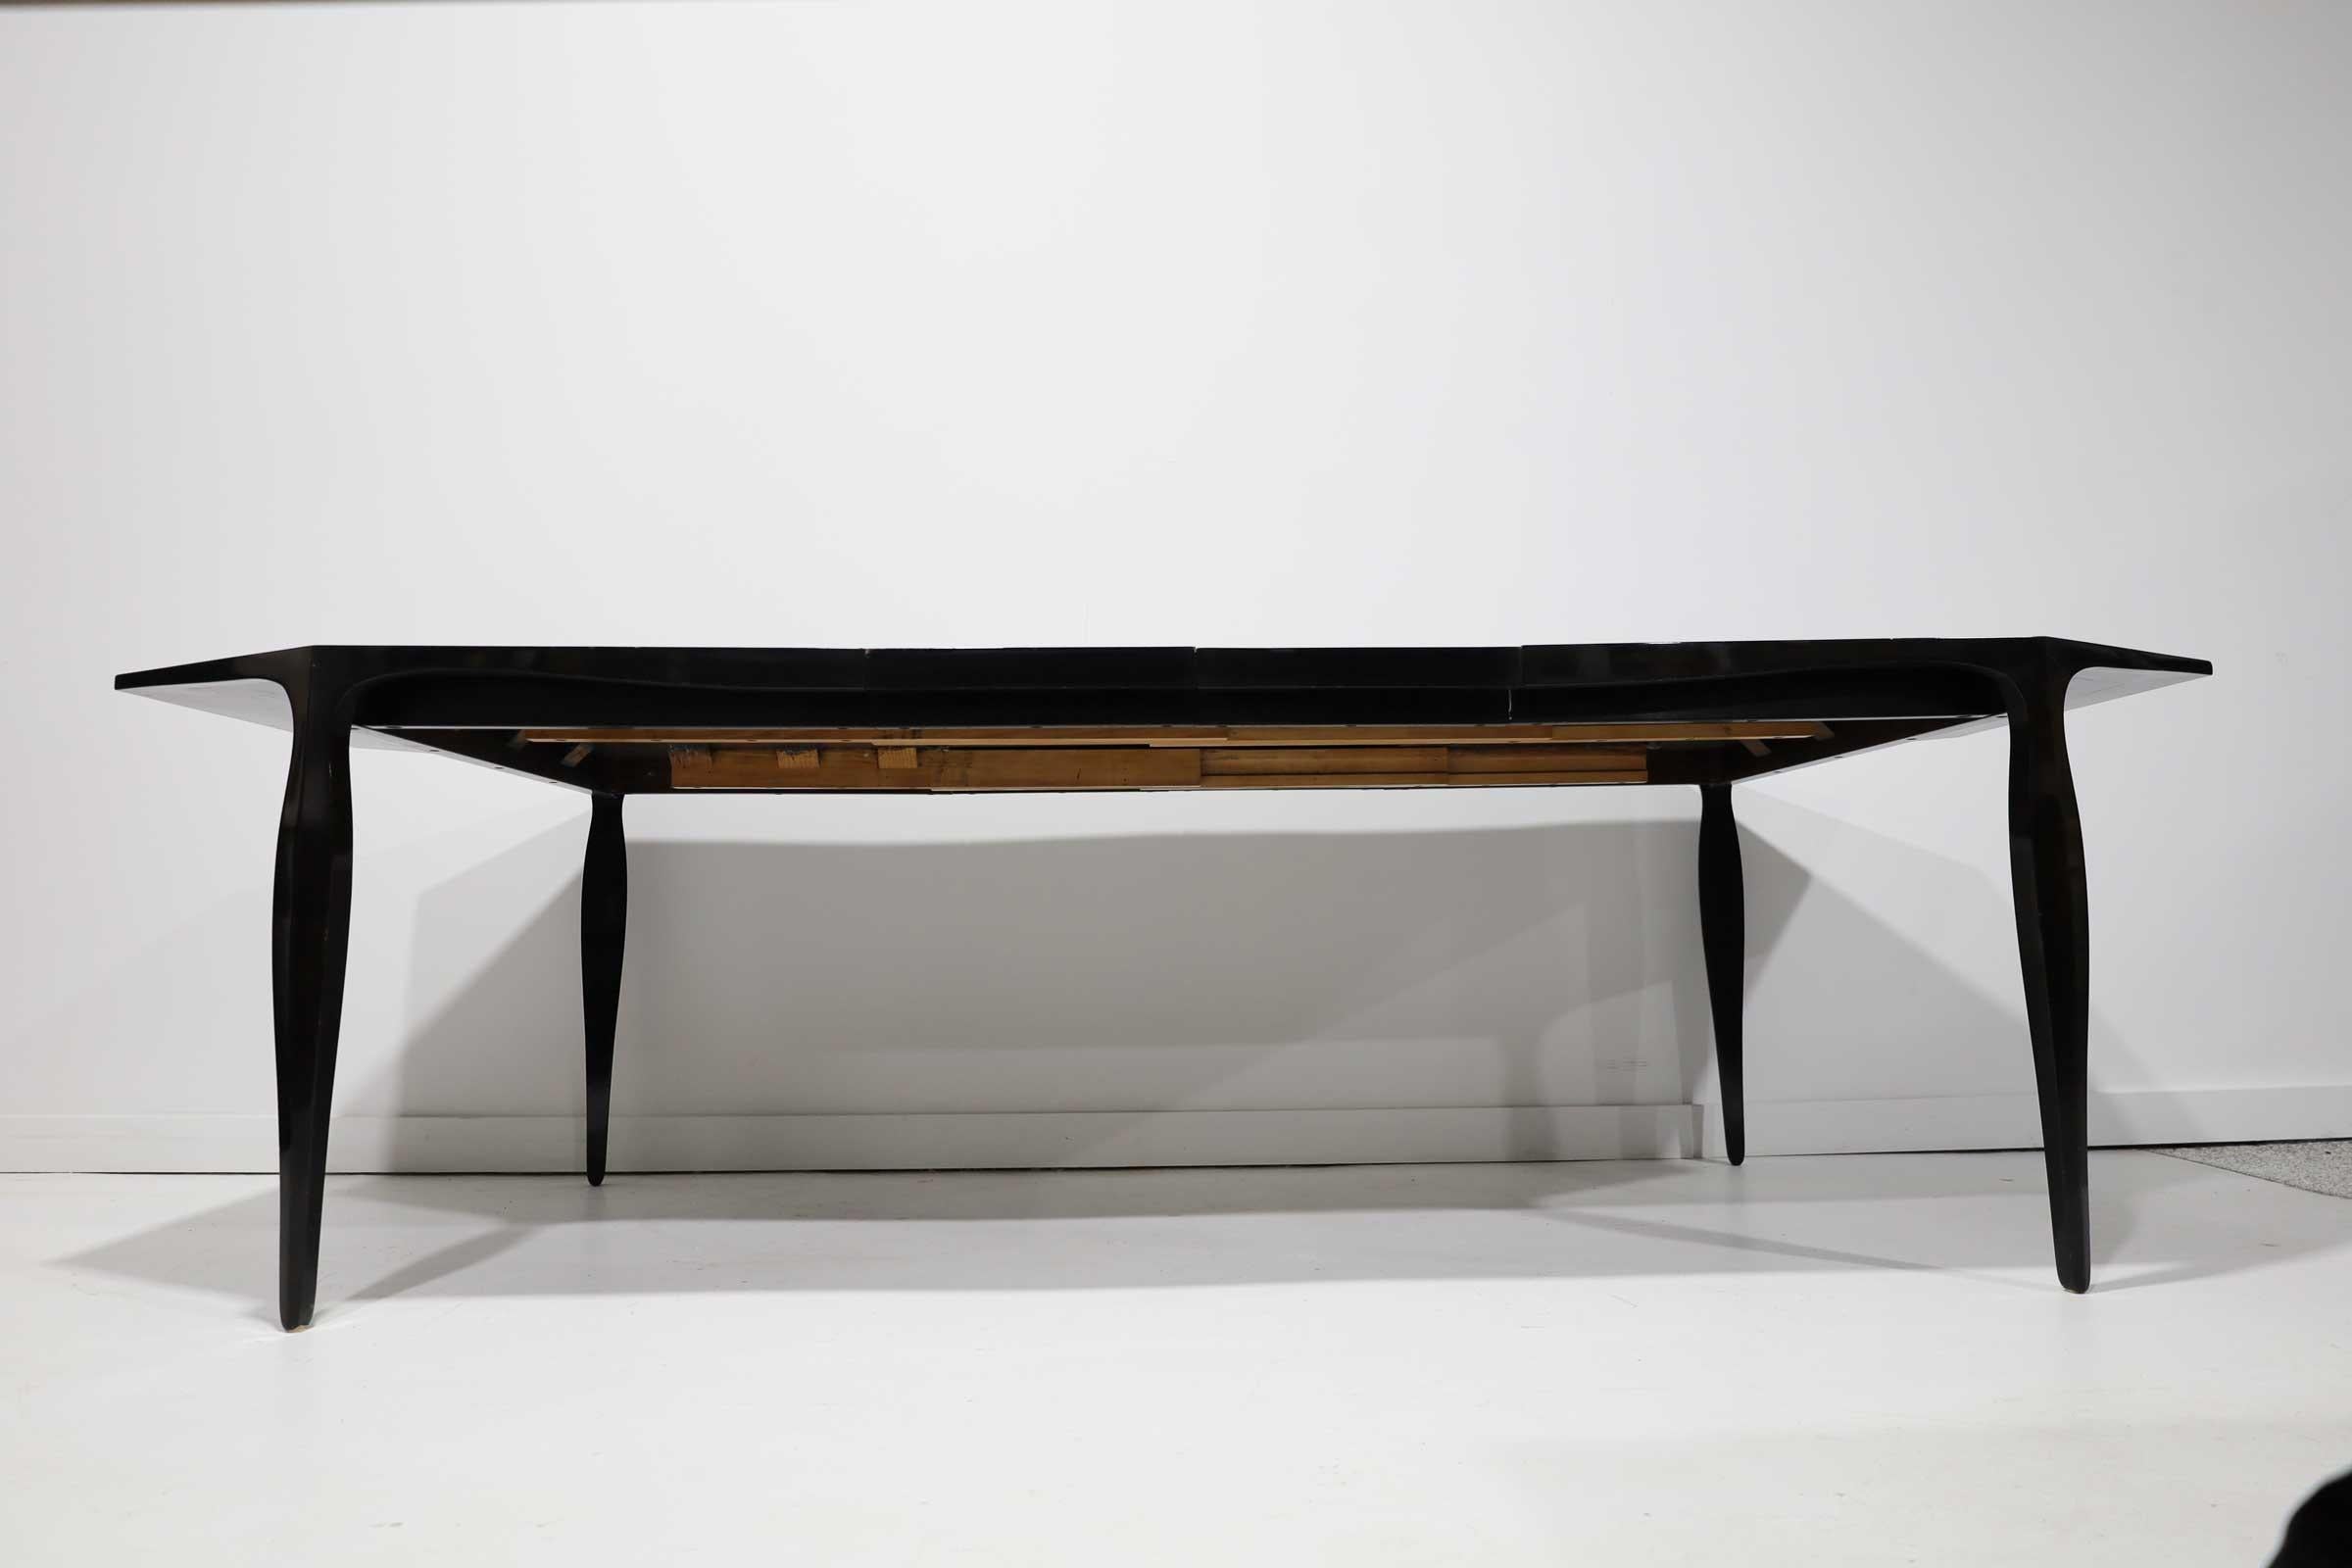 A beautiful example of Ed Wormley's refined aesthetic and Dunbar's quality construction, this dining table has a very pleasing mix of straight lines and elegant curves. The octagonal top has a skirt and legs with undulating lines. There is a banding